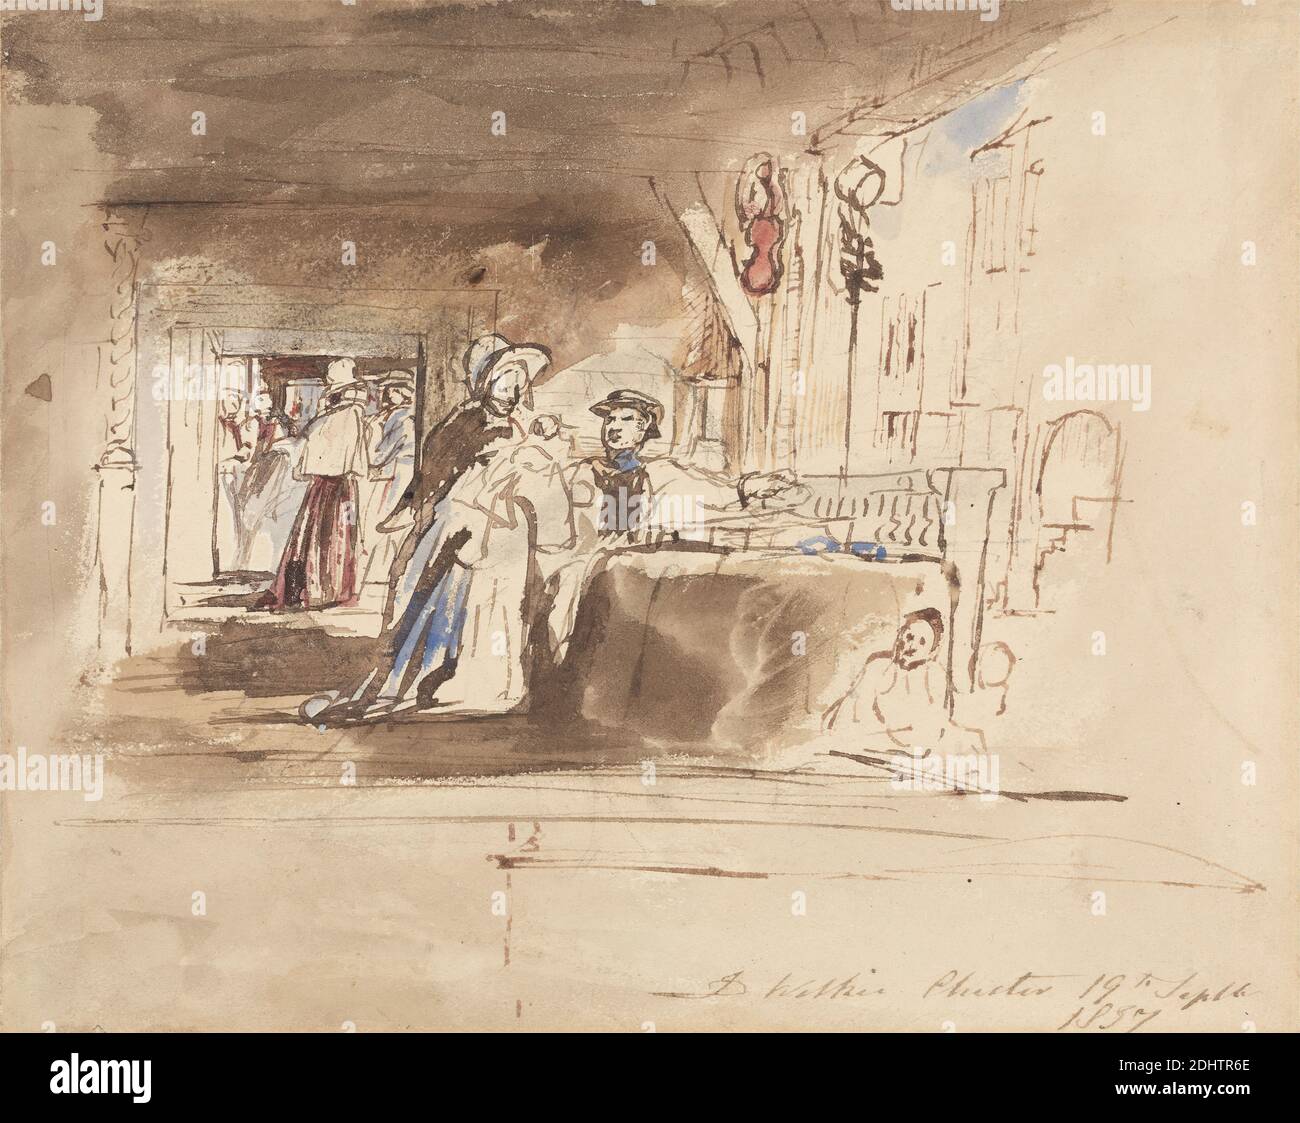 Shopping in the Rows, Chester, Sir David Wilkie, 1785–1841, British, 1837, Watercolor with brown wash and brown ink over graphite on medium, slightly textured, cream wove paper, mounted on thick, slightly textured, beige card, Mount: 7 1/2 x 9 3/8 inches (19.1 x 23.8 cm) and Sheet: 7 × 8 3/4 inches (17.8 × 22.3 cm), figures, genre subject, market (event), men, merchants, shopping, shops, tables, vendors, violin, walkways, women, Cheshire, Chester, Chester Rows, England, United Kingdom Stock Photo